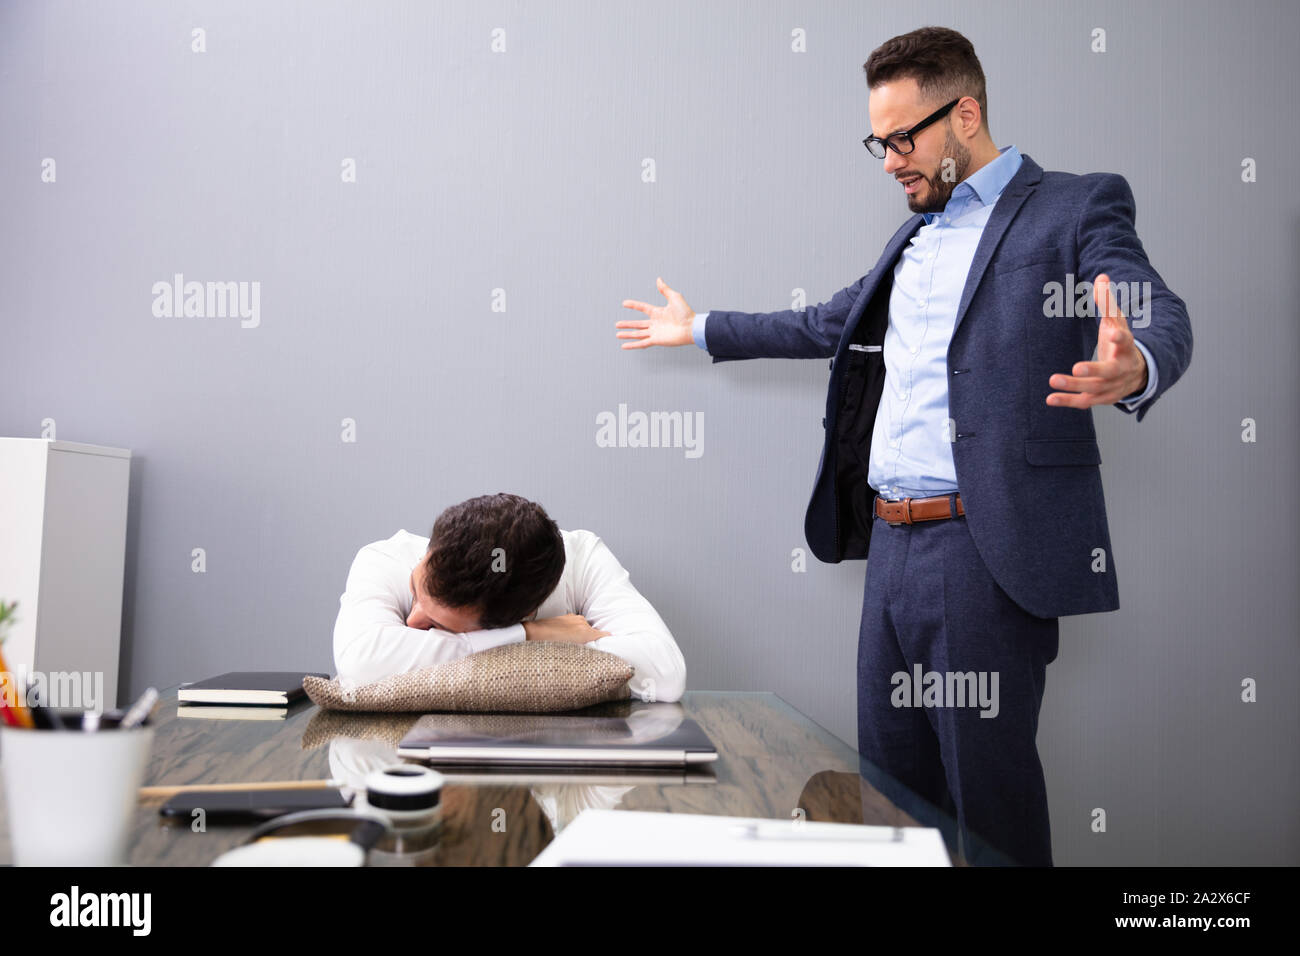 Angry Boss Caught Tired Lazy Employee Sleeping At Workplace Stock Photo